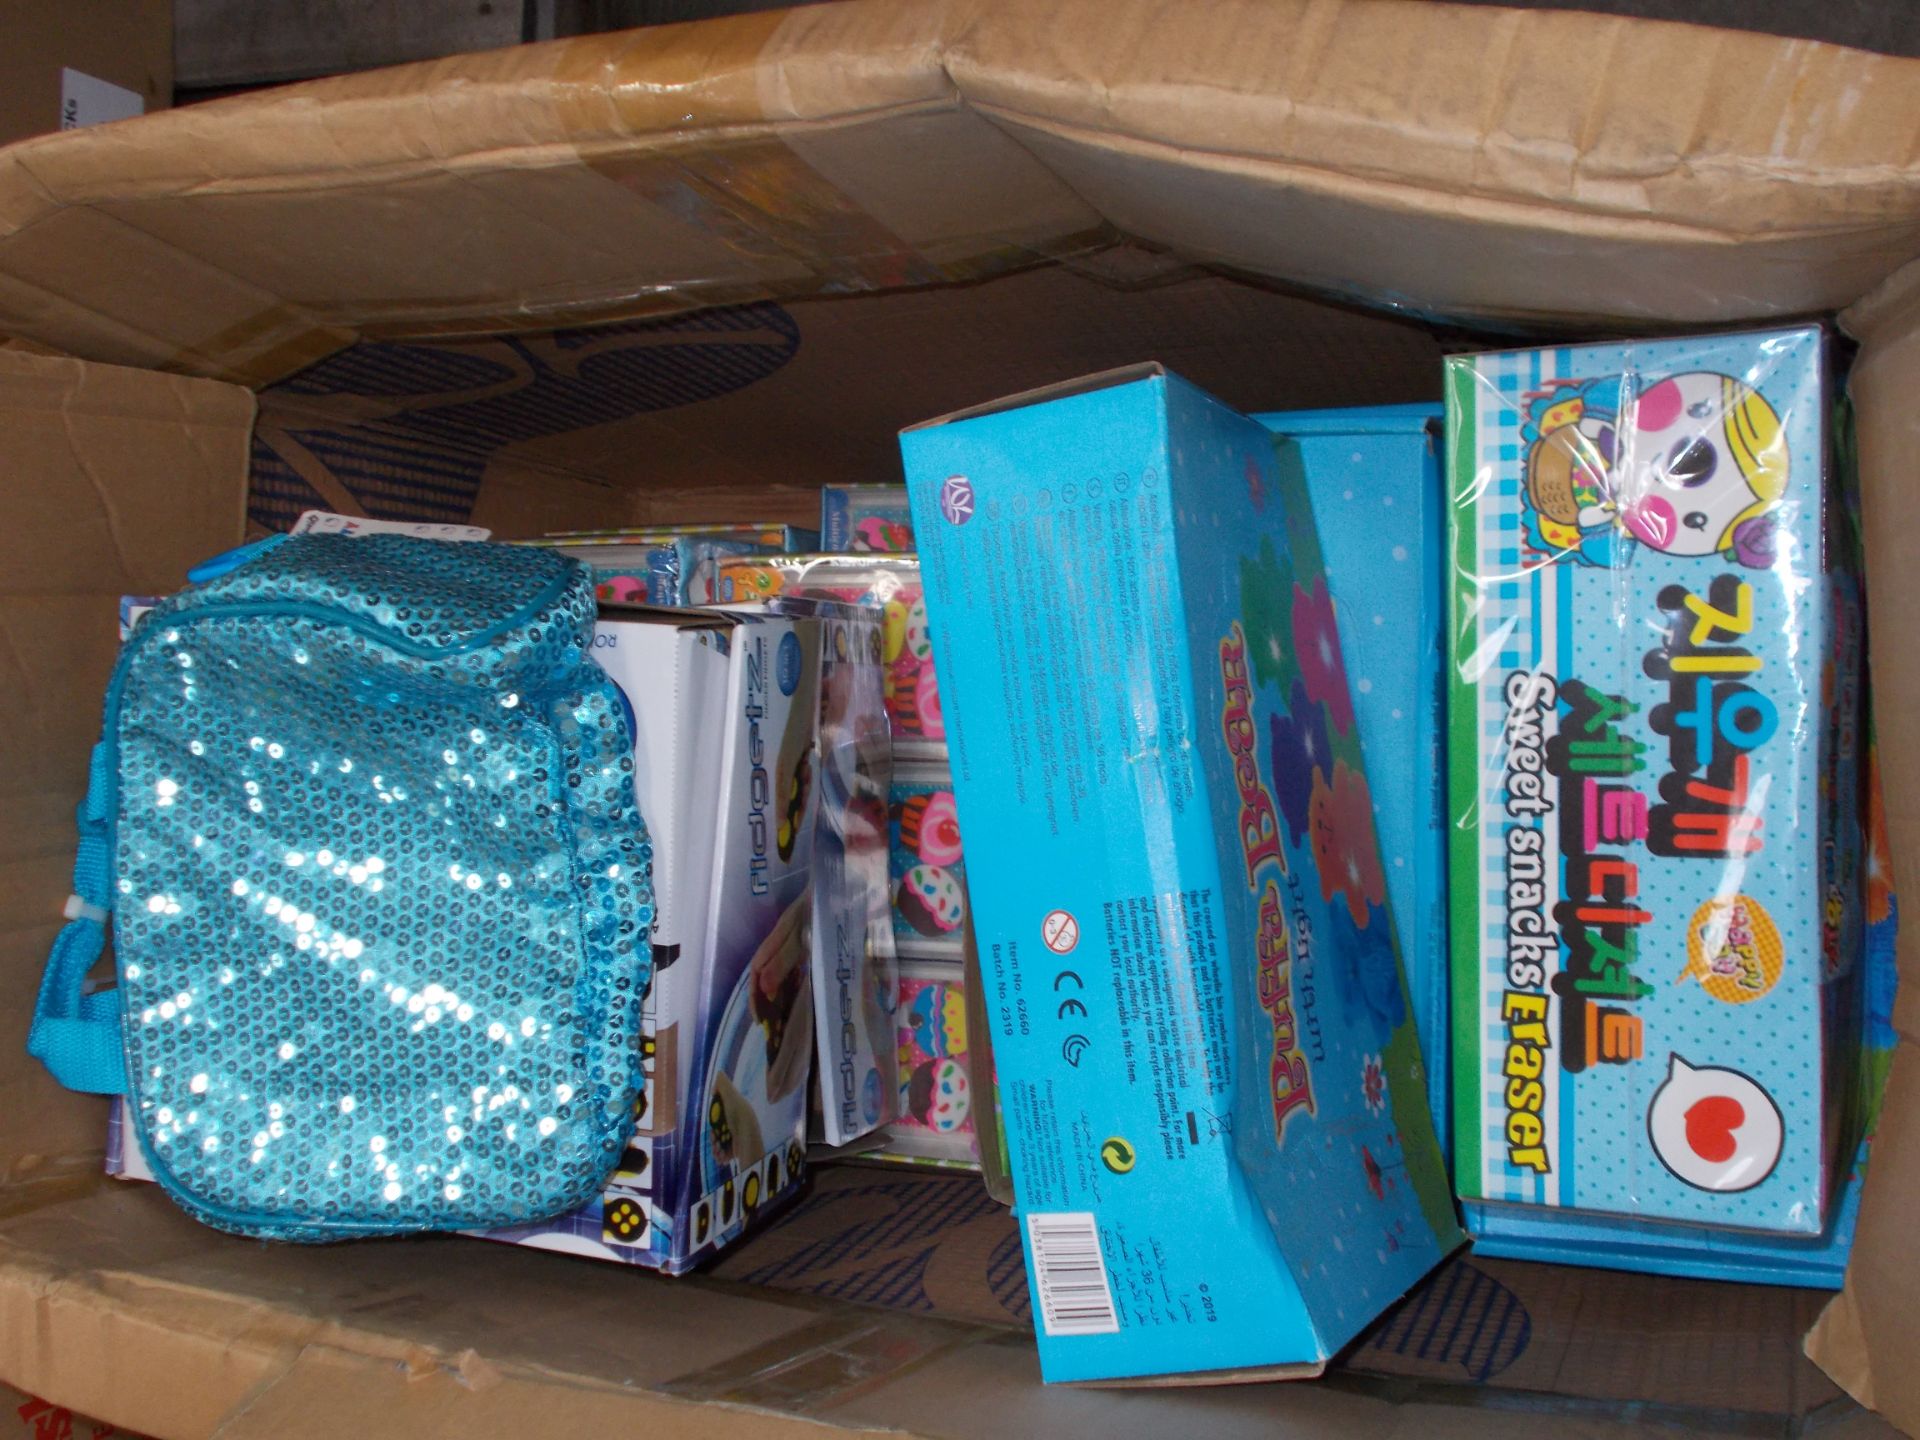 Assortment of children’s toys / games, to 5 x boxes, to include: Finger Fidgets, Glow bracelets, - Image 2 of 4